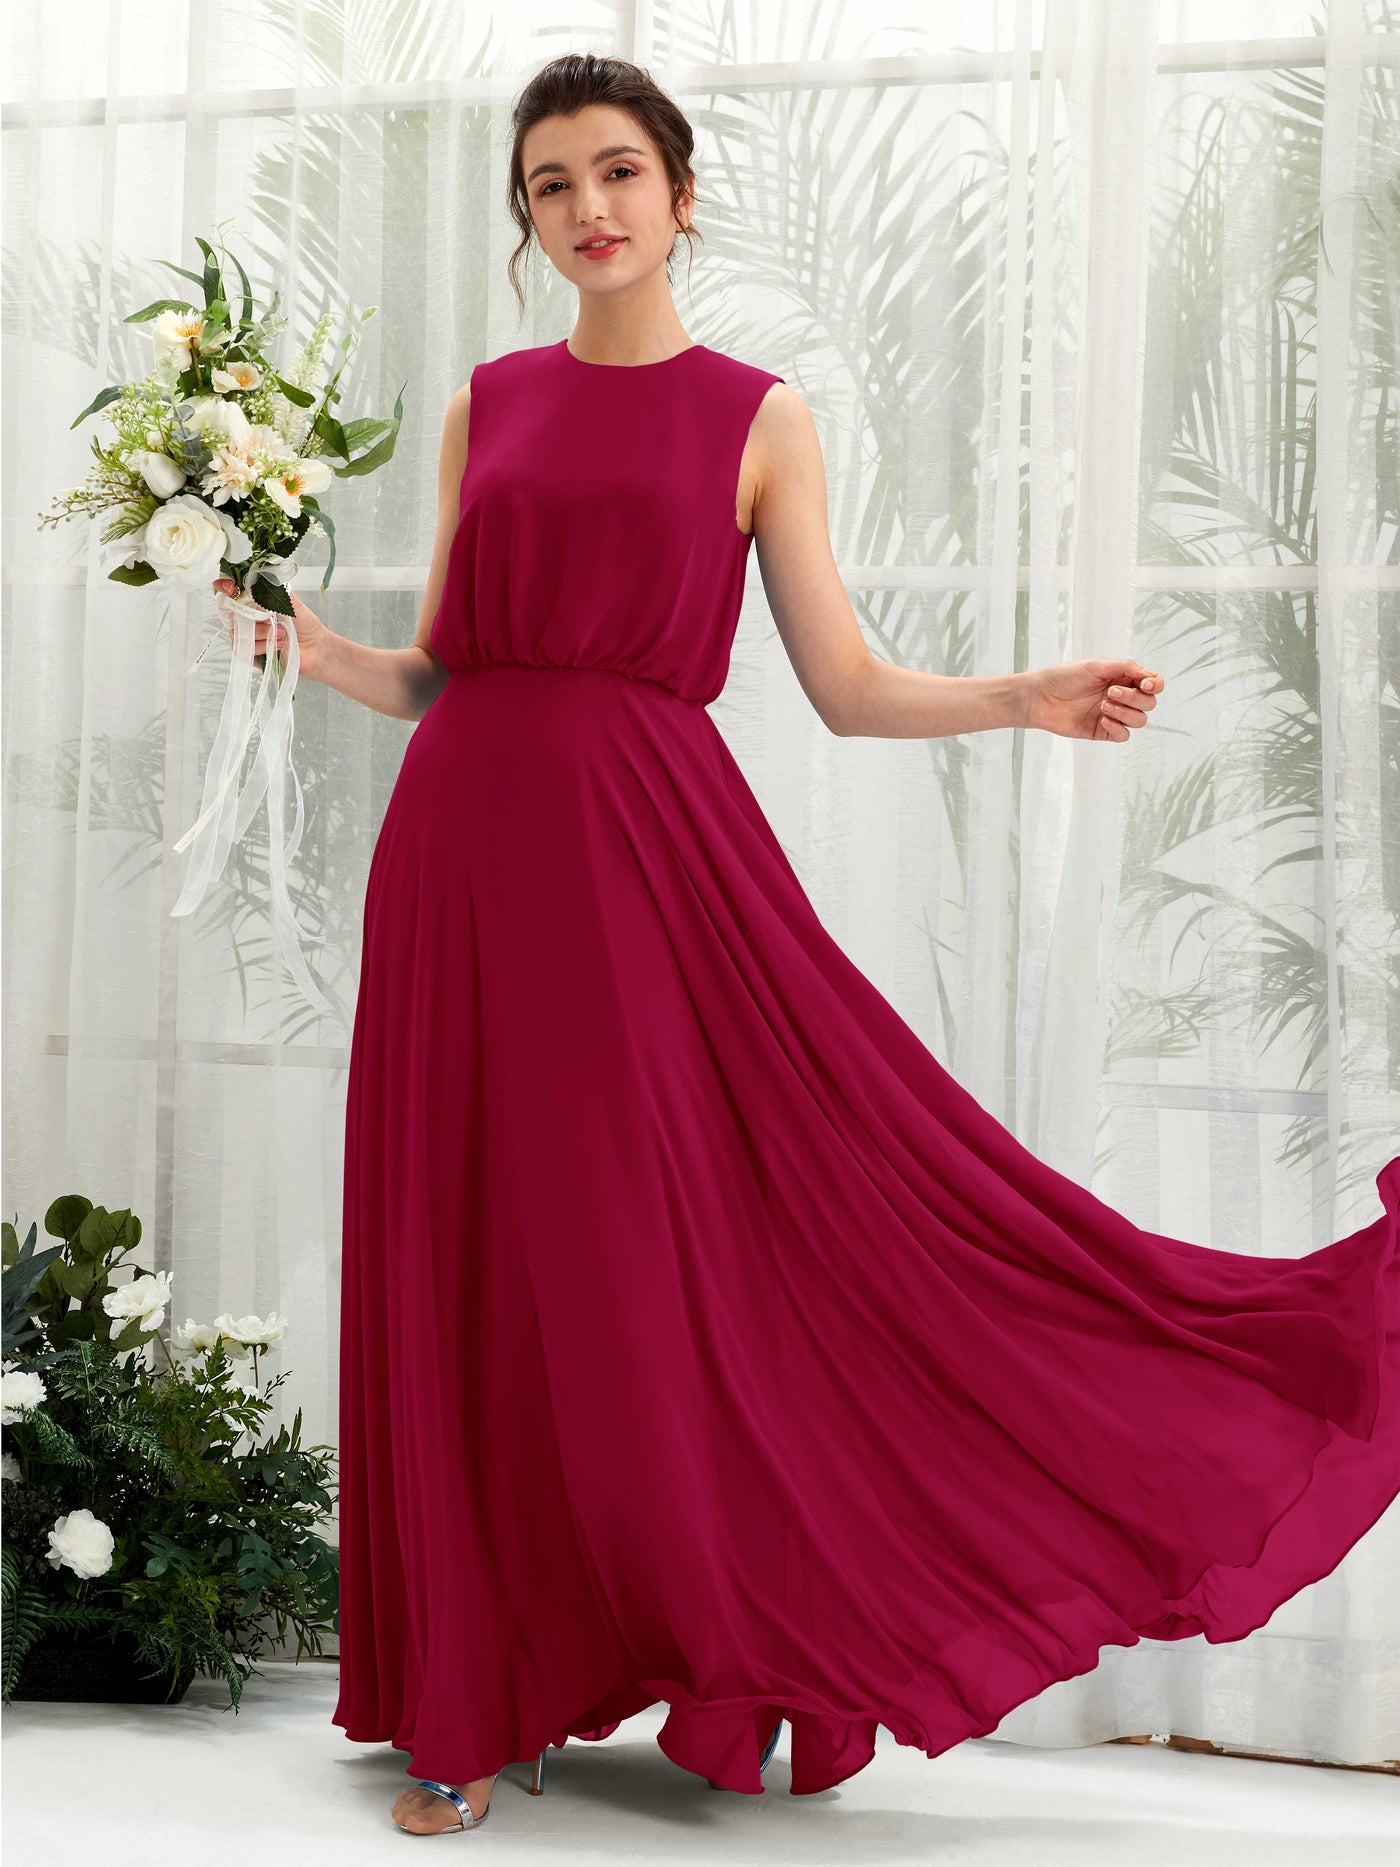 Jester Red Bridesmaid Dresses Bridesmaid Dress A-line Chiffon Round Full Length Sleeveless Wedding Party Dress (81222841)#color_jester-red